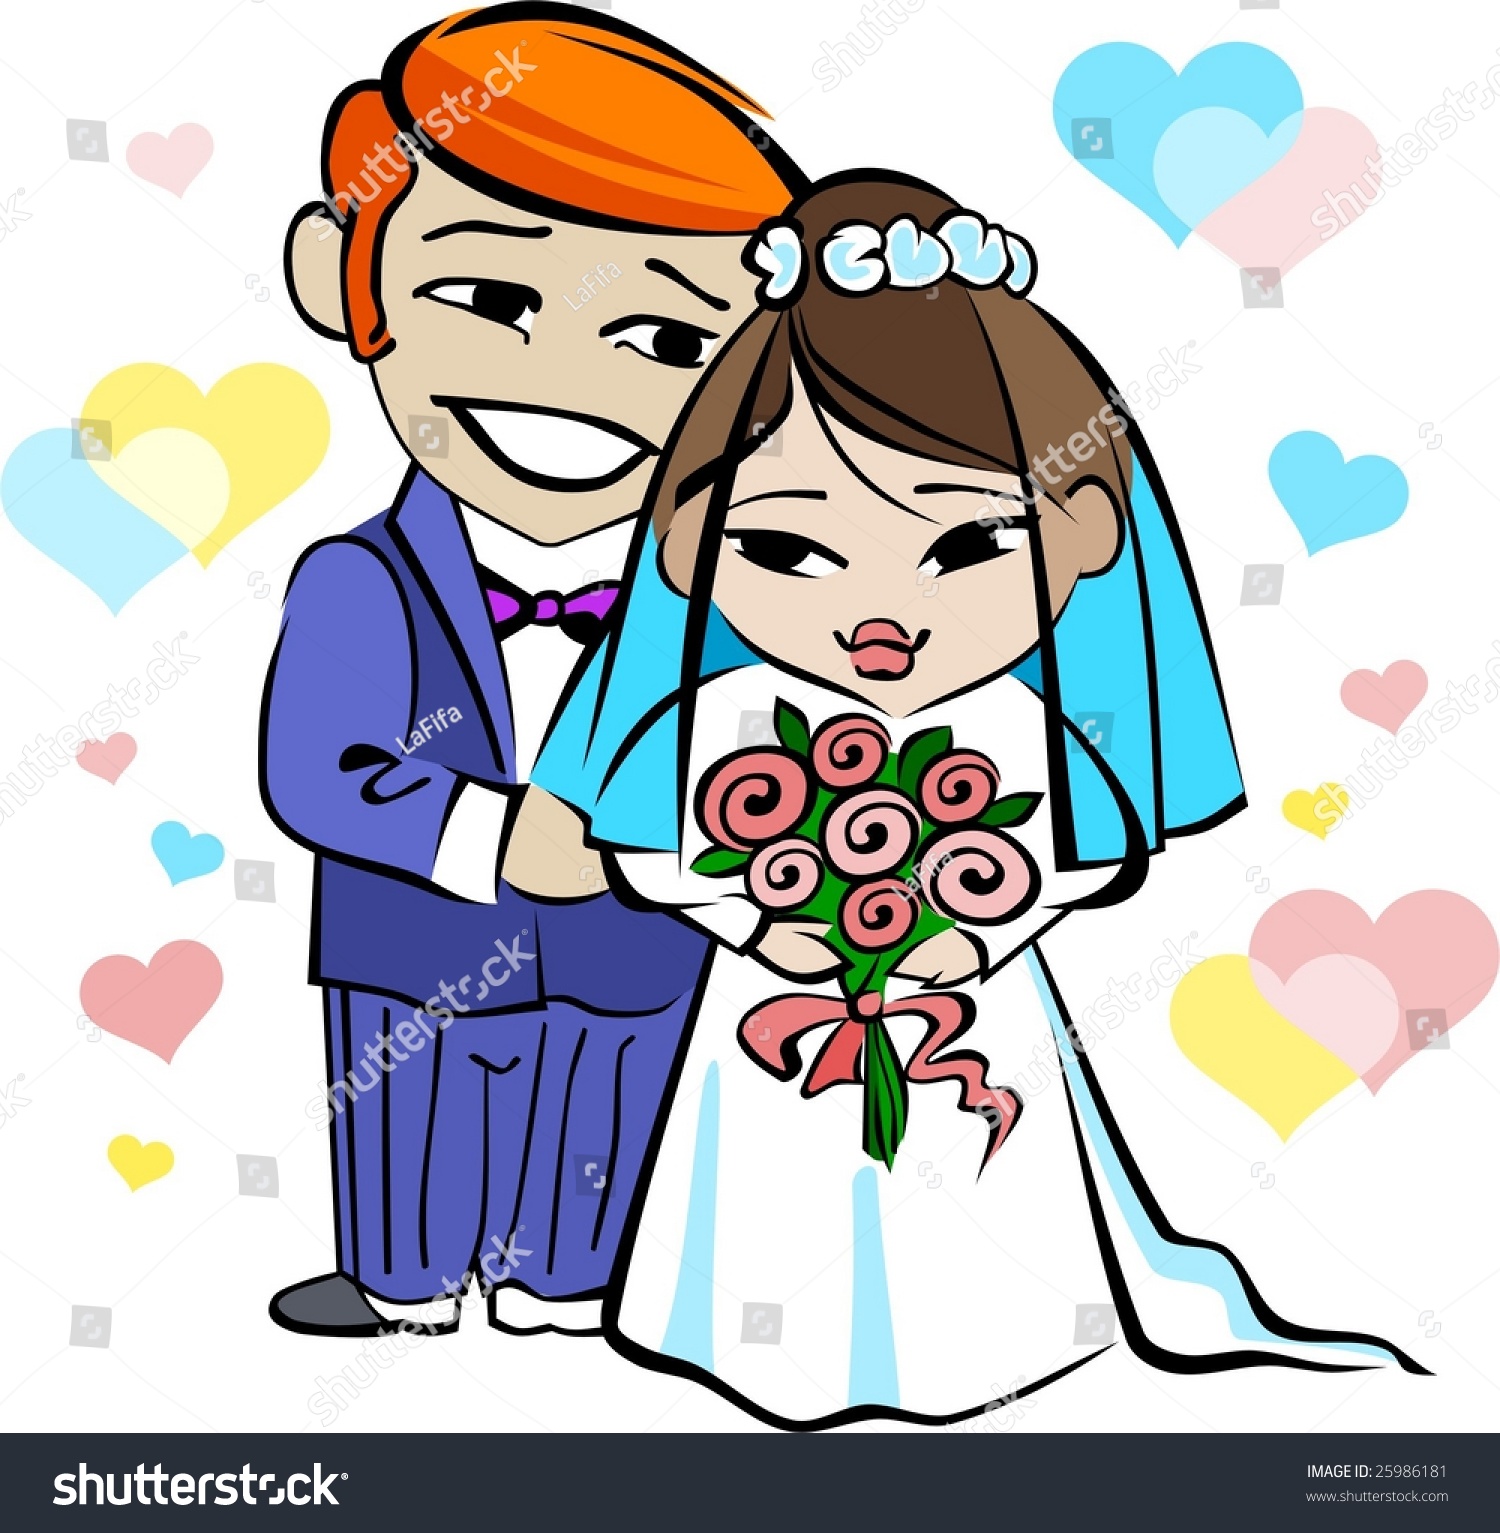 Newly Married Couple Stock Vector 25986181 - Shutterstock